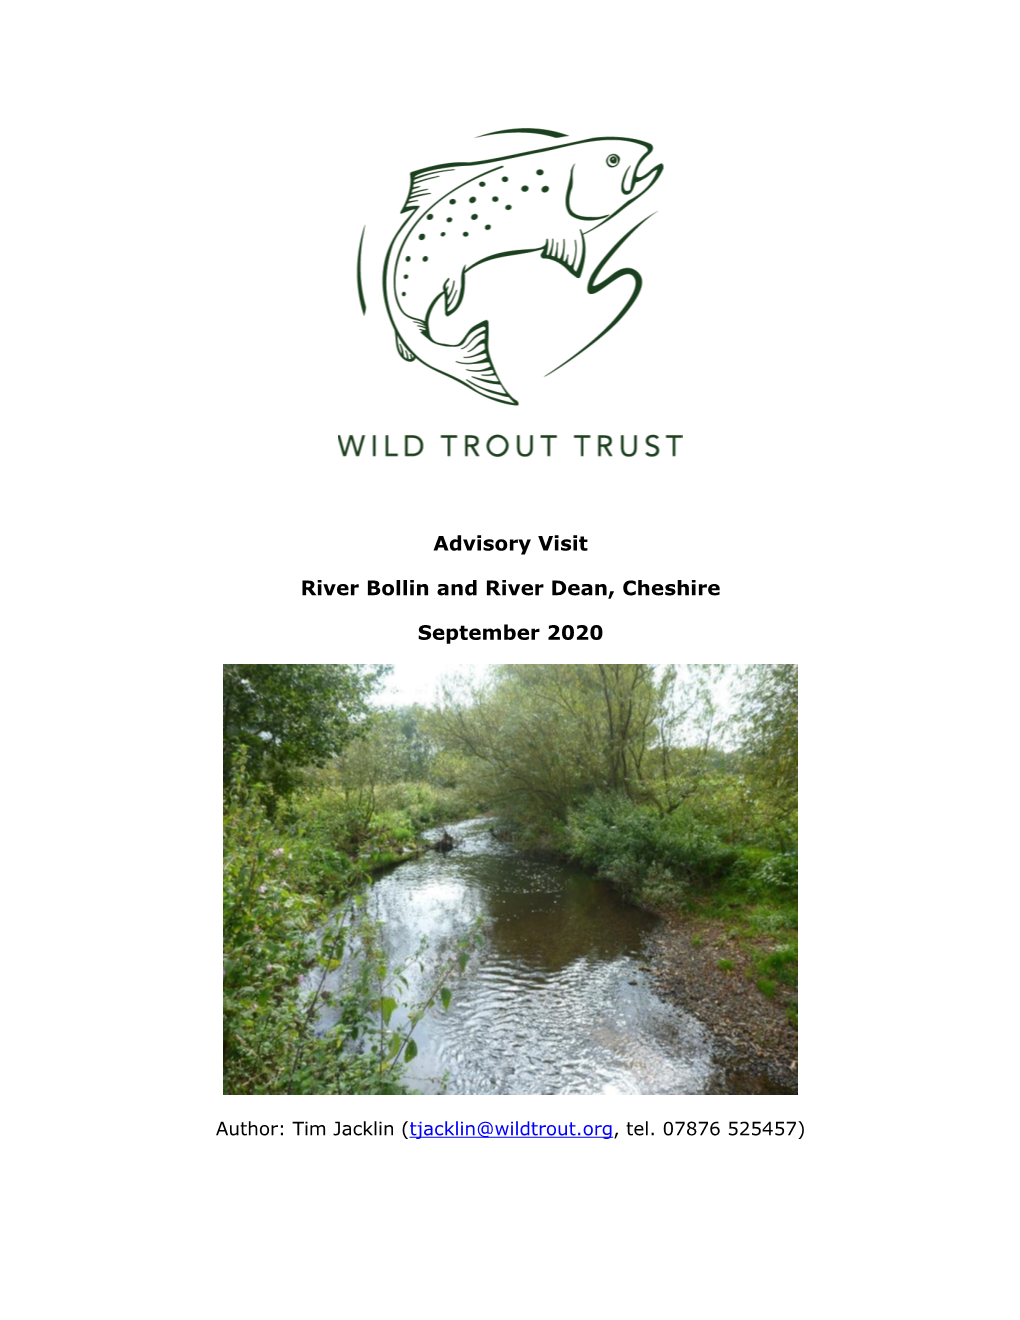 Advisory Visit River Bollin and River Dean, Cheshire September 2020